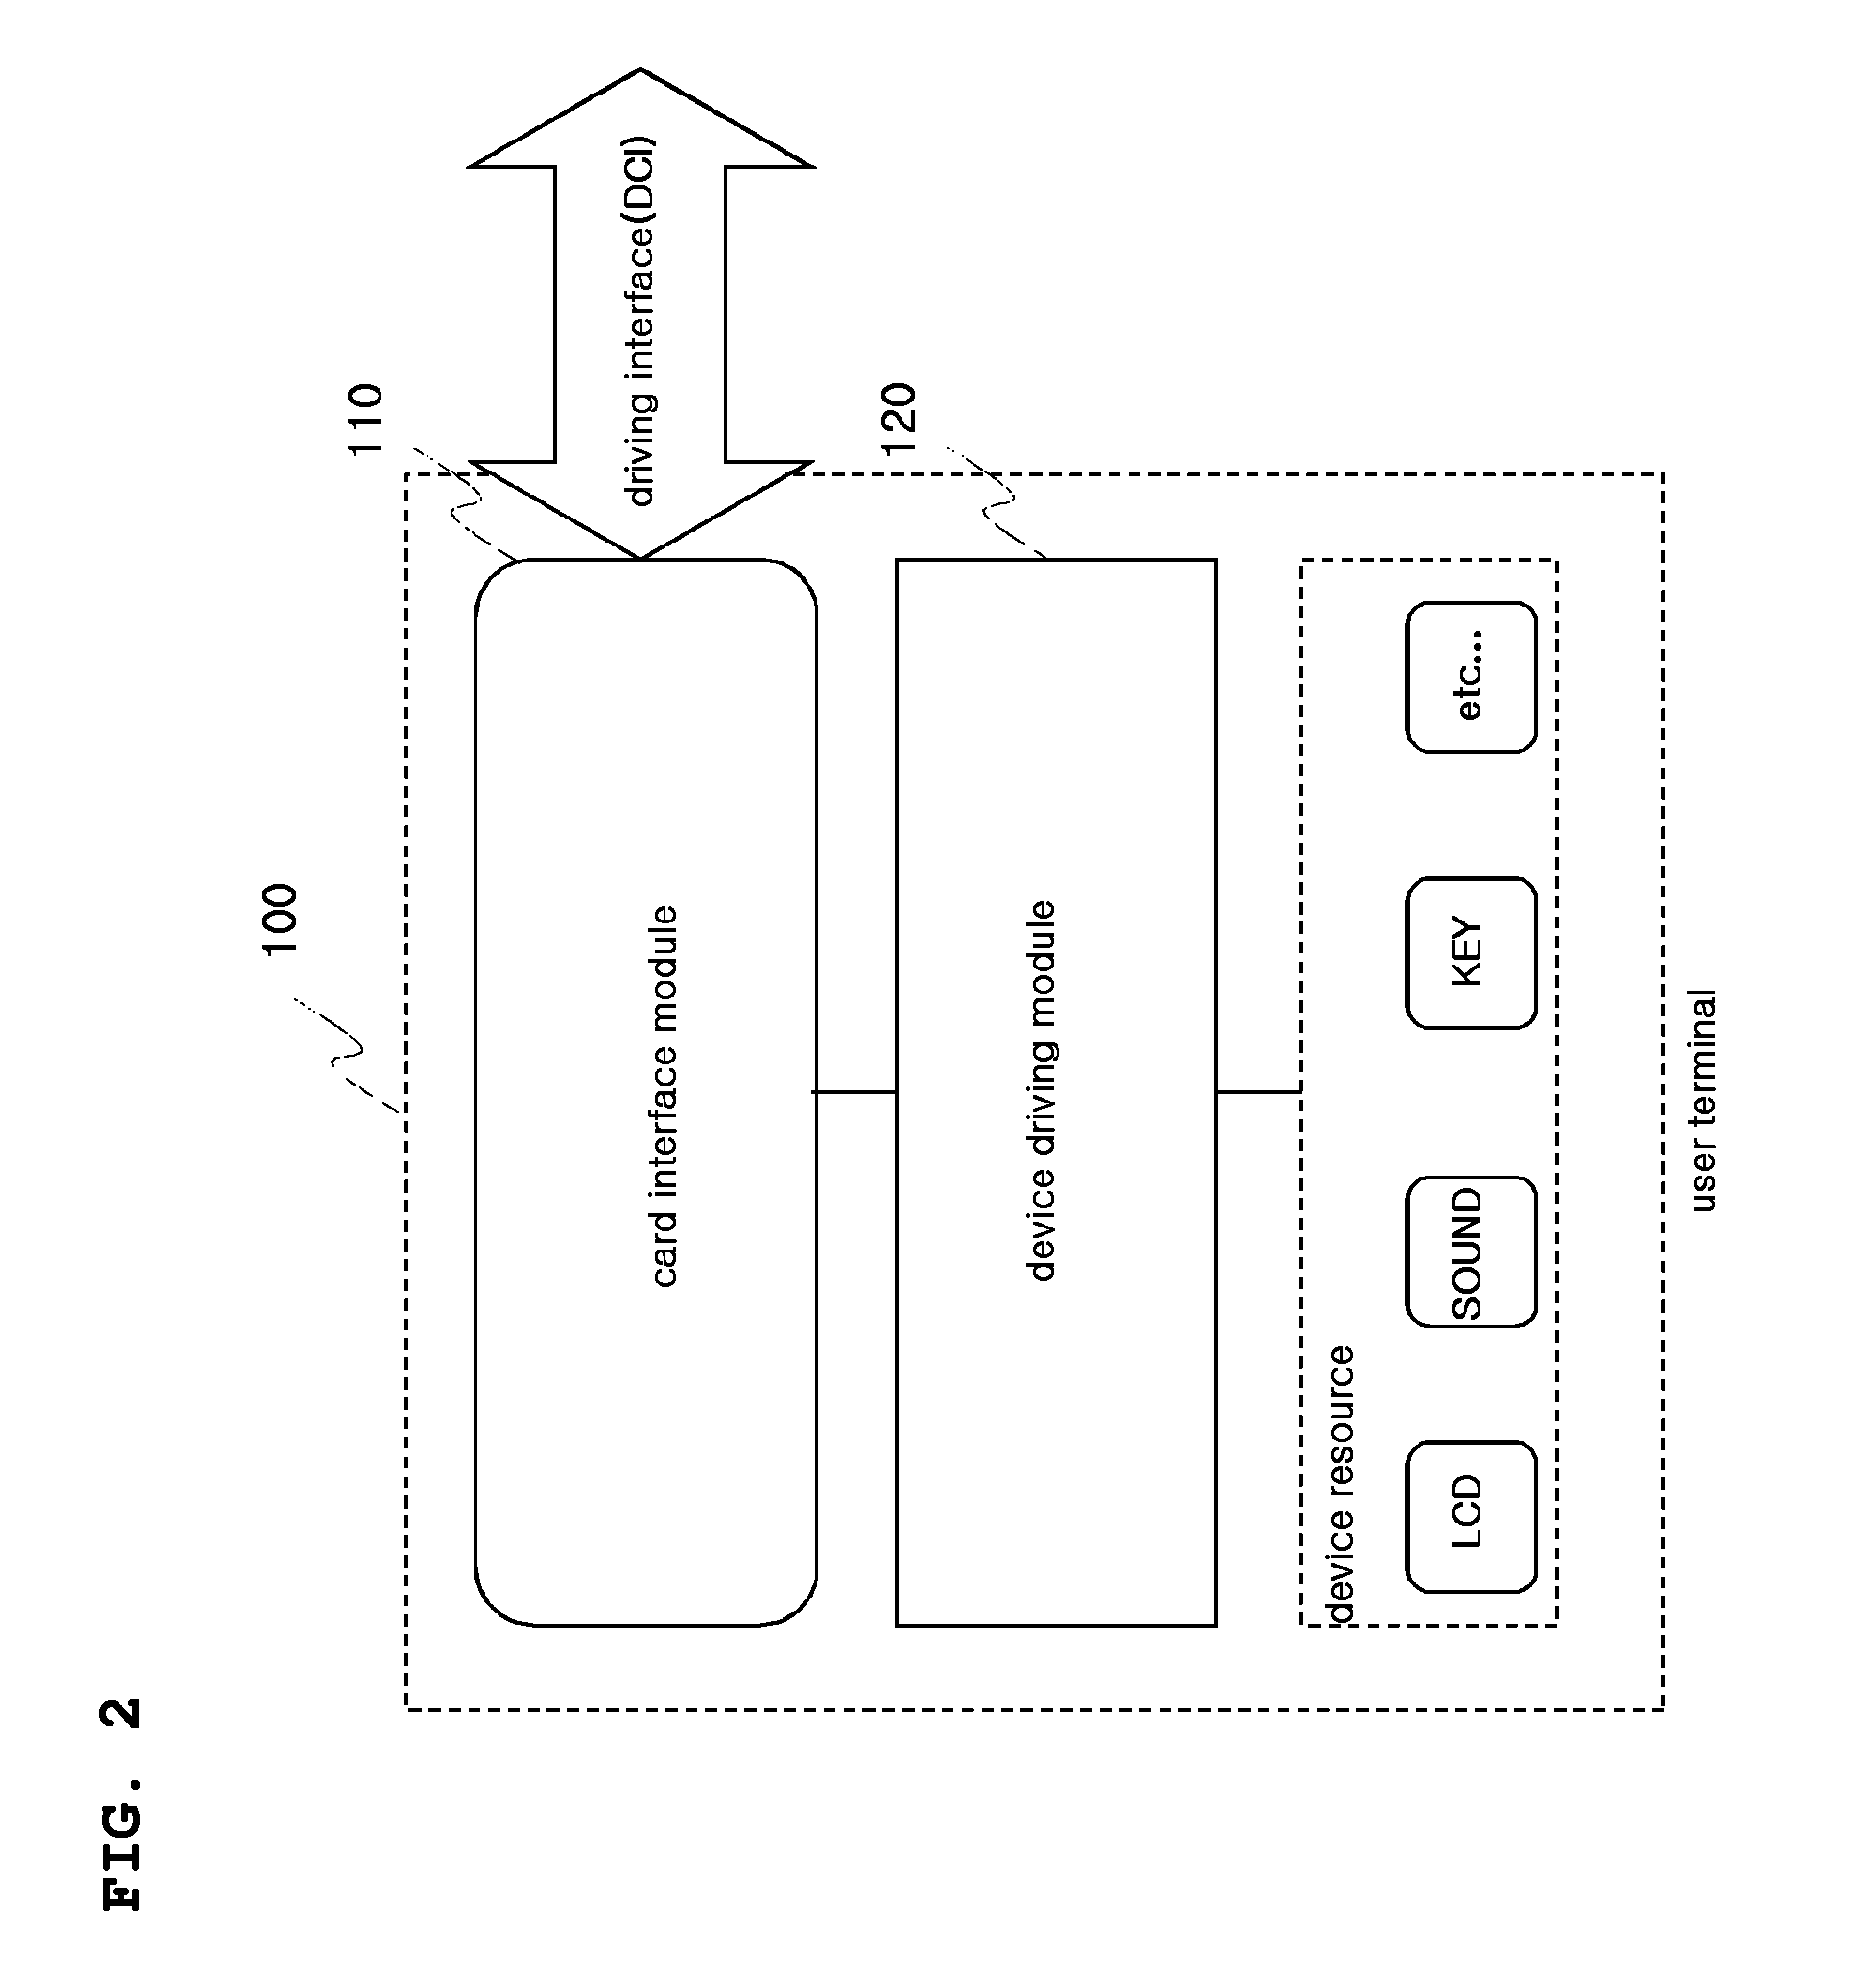 Smart card-based browsing system and smart card-based browsing method and smart card for the same